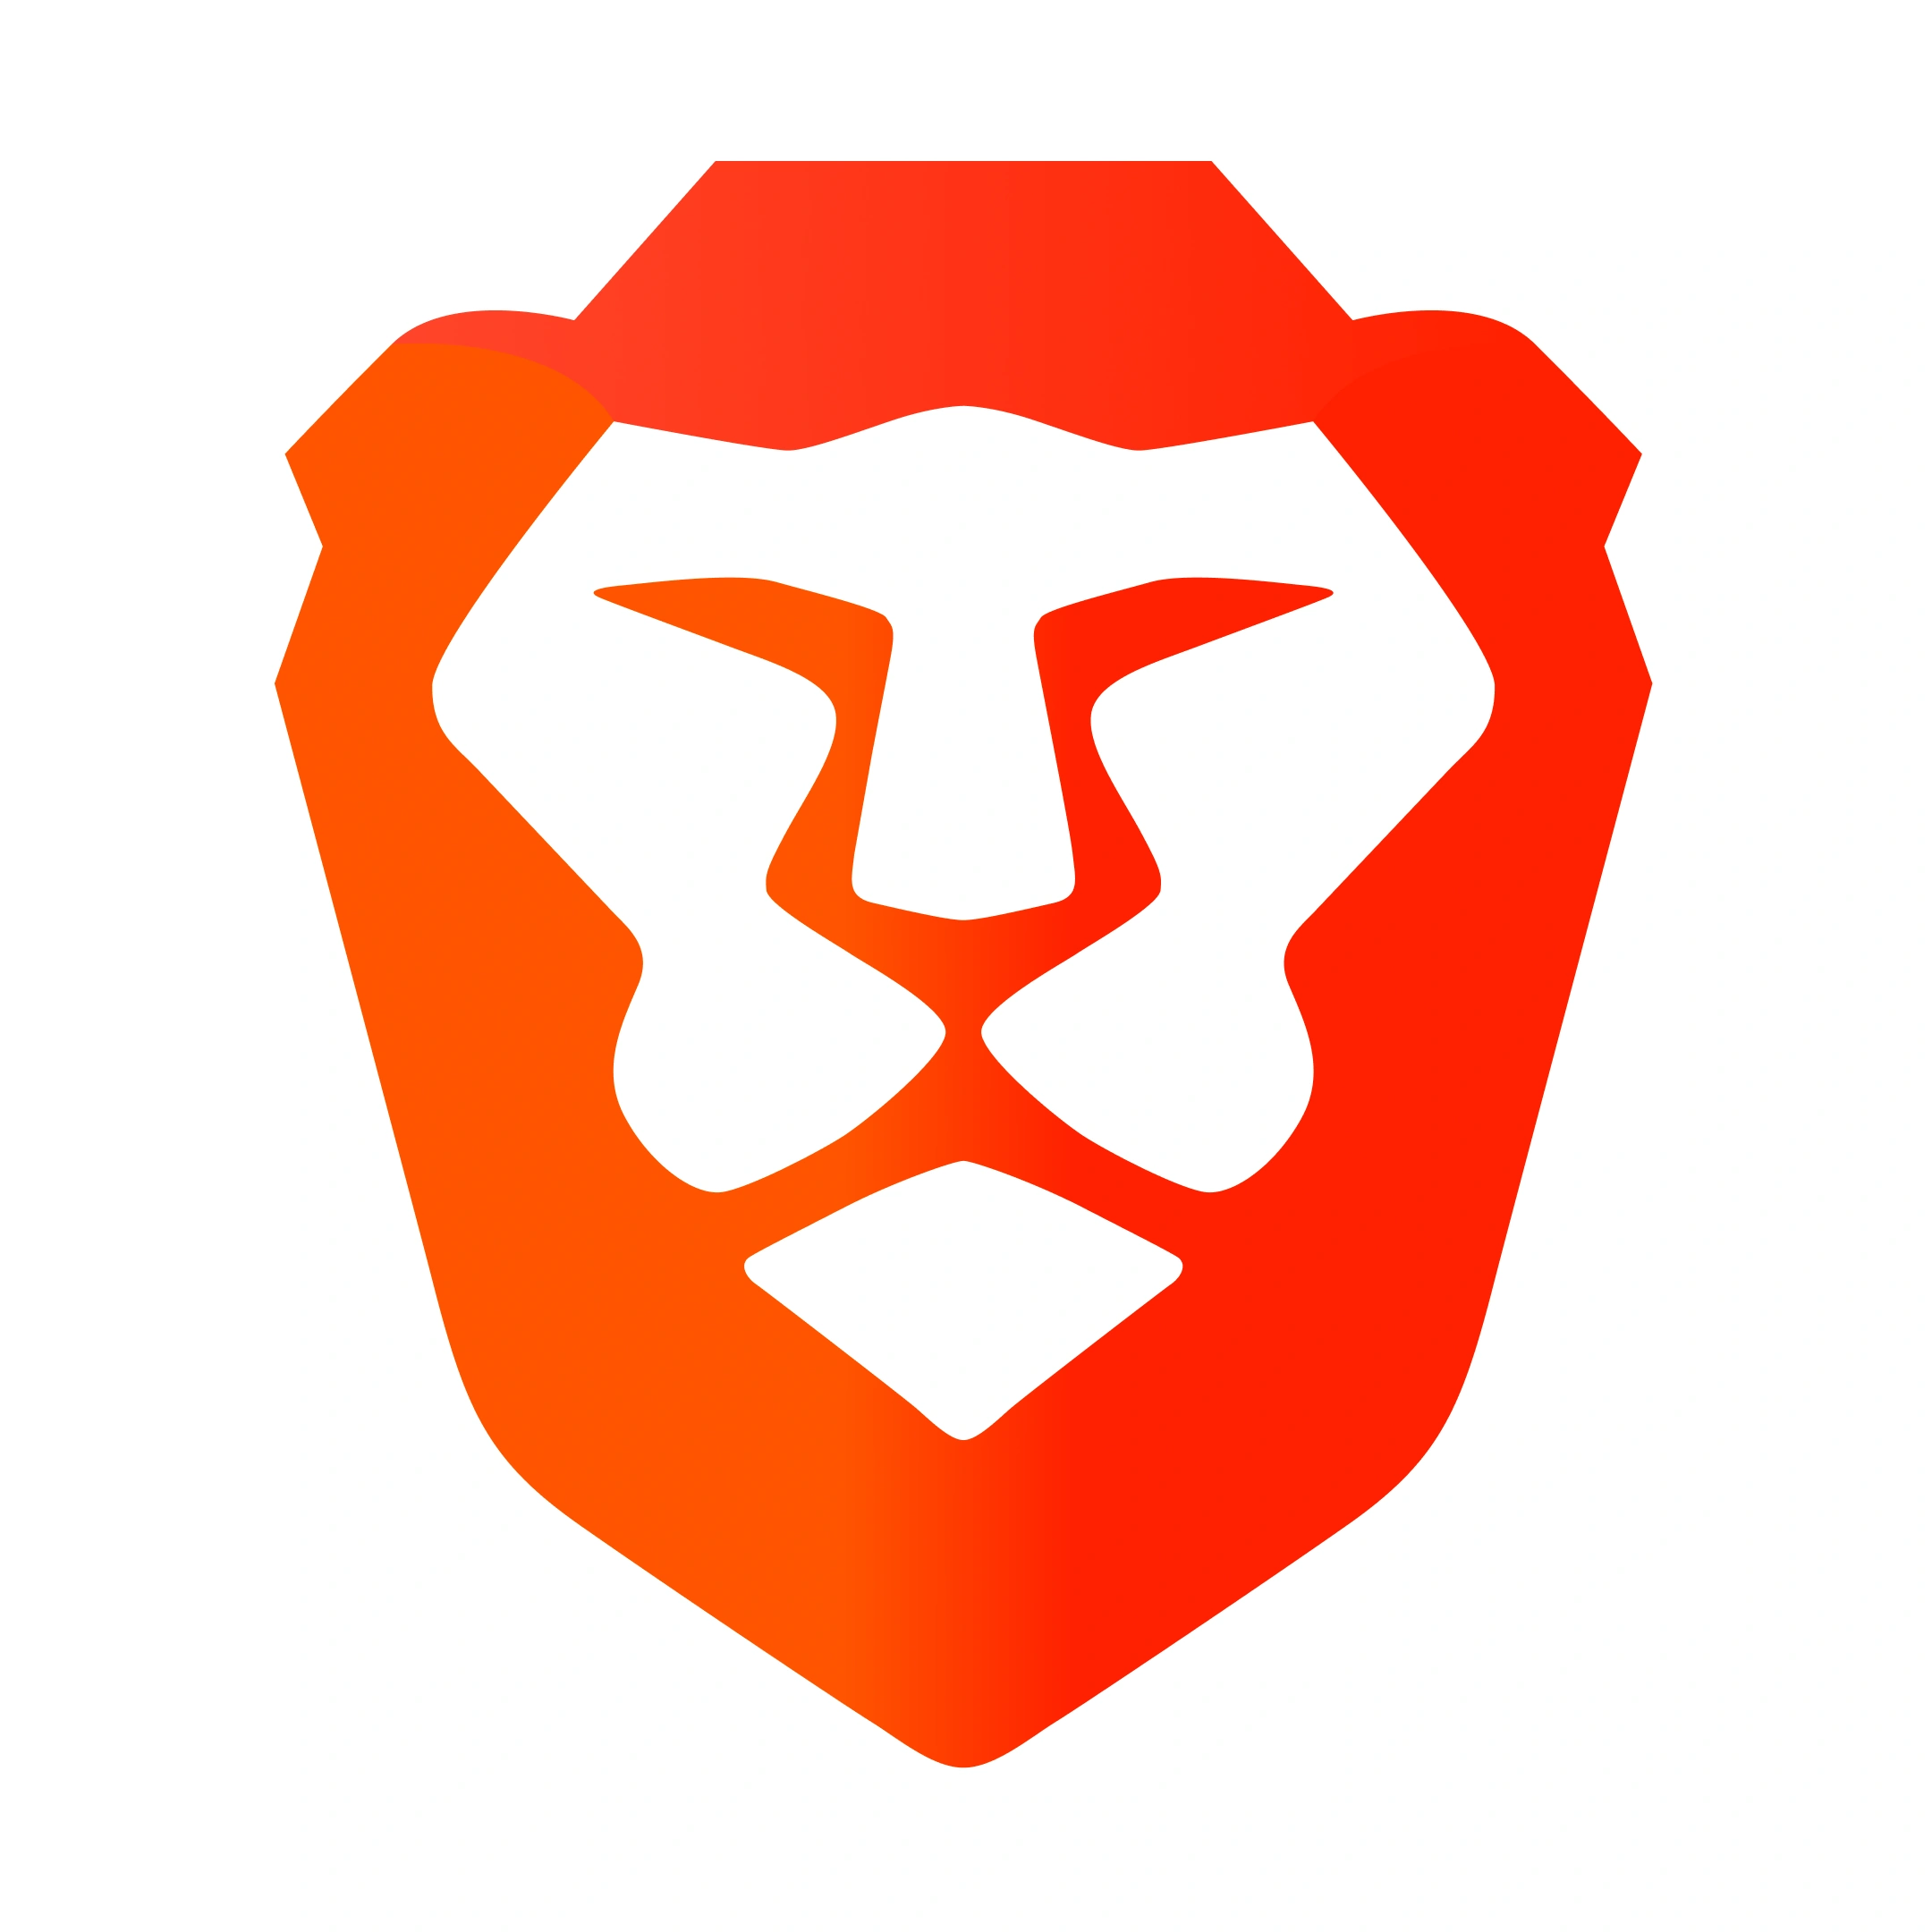 Brave Browser: A Daring New Frontier in Web Browsing?